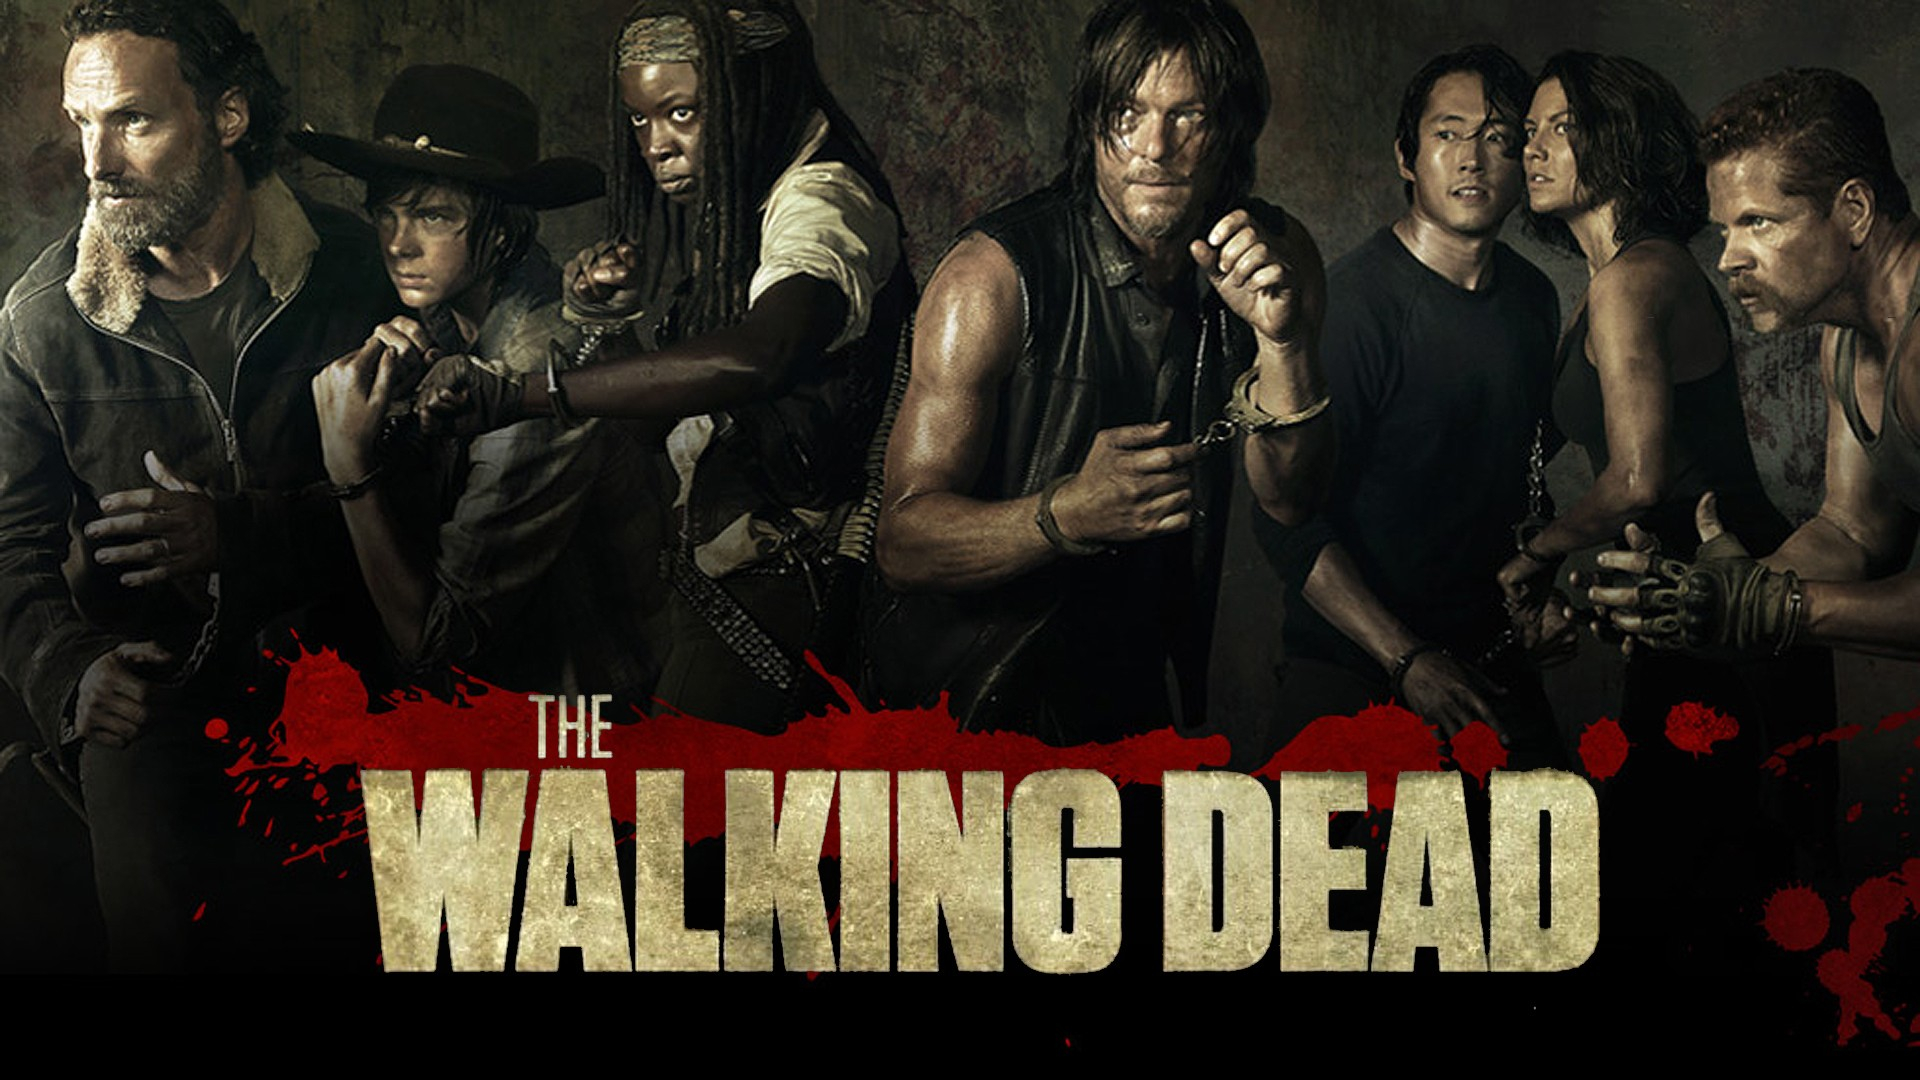 1920x1080 790+ The Walking Dead HD Wallpapers and Backgrounds